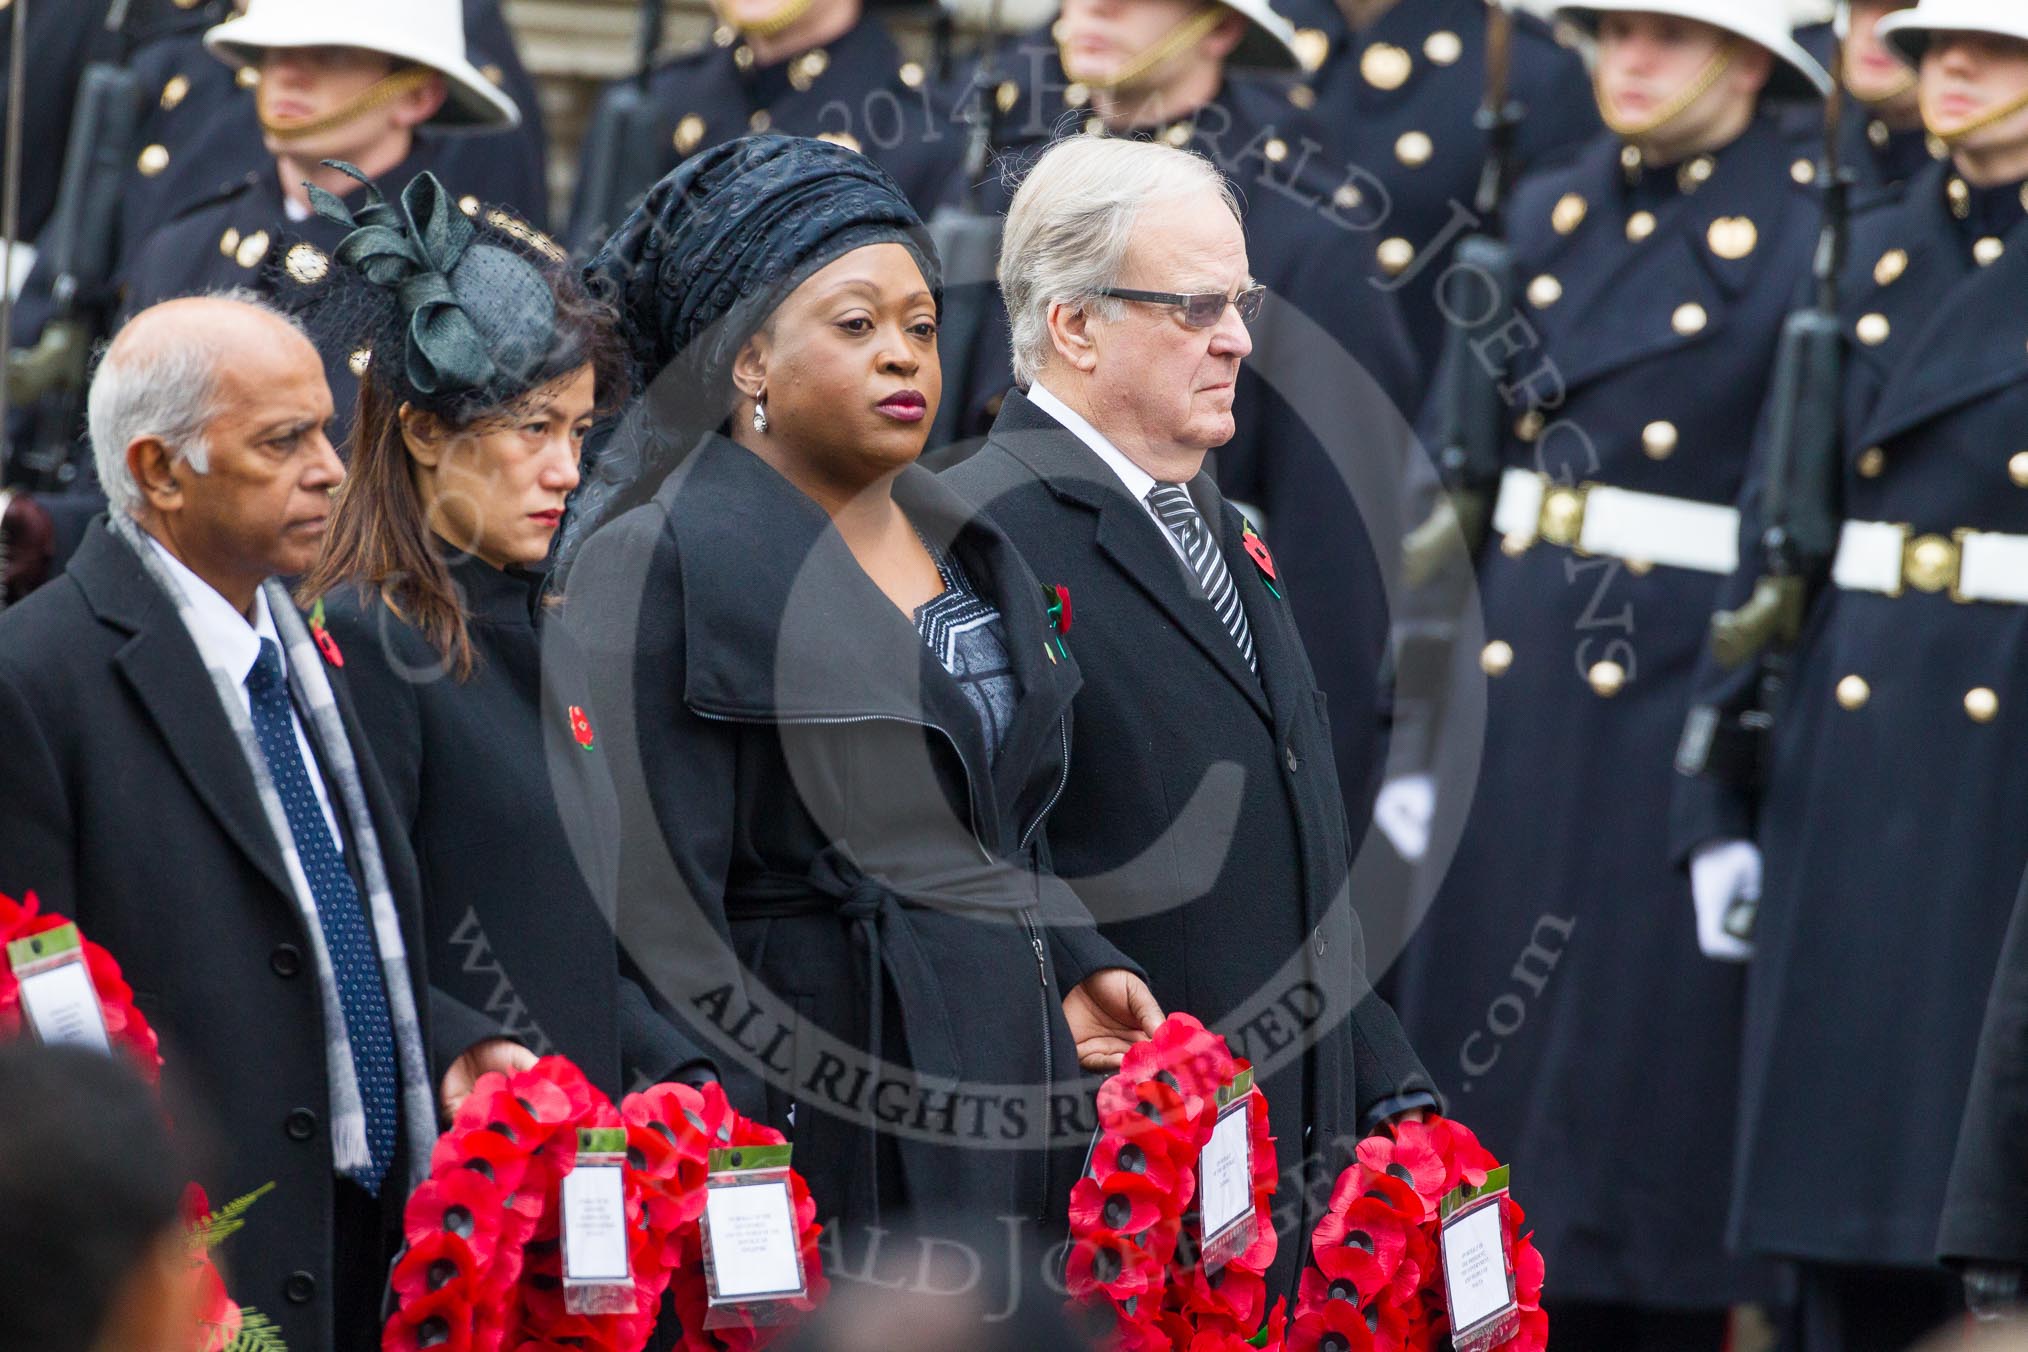 Remembrance Sunday at the Cenotaph in London 2014: The High Commissioner of Guyana, the High Commissioner of Singapore, the High Commissioner of Zambia and and the High Commissioner of Malta with their wreaths at the Cenotaph.
Press stand opposite the Foreign Office building, Whitehall, London SW1,
London,
Greater London,
United Kingdom,
on 09 November 2014 at 11:03, image #174